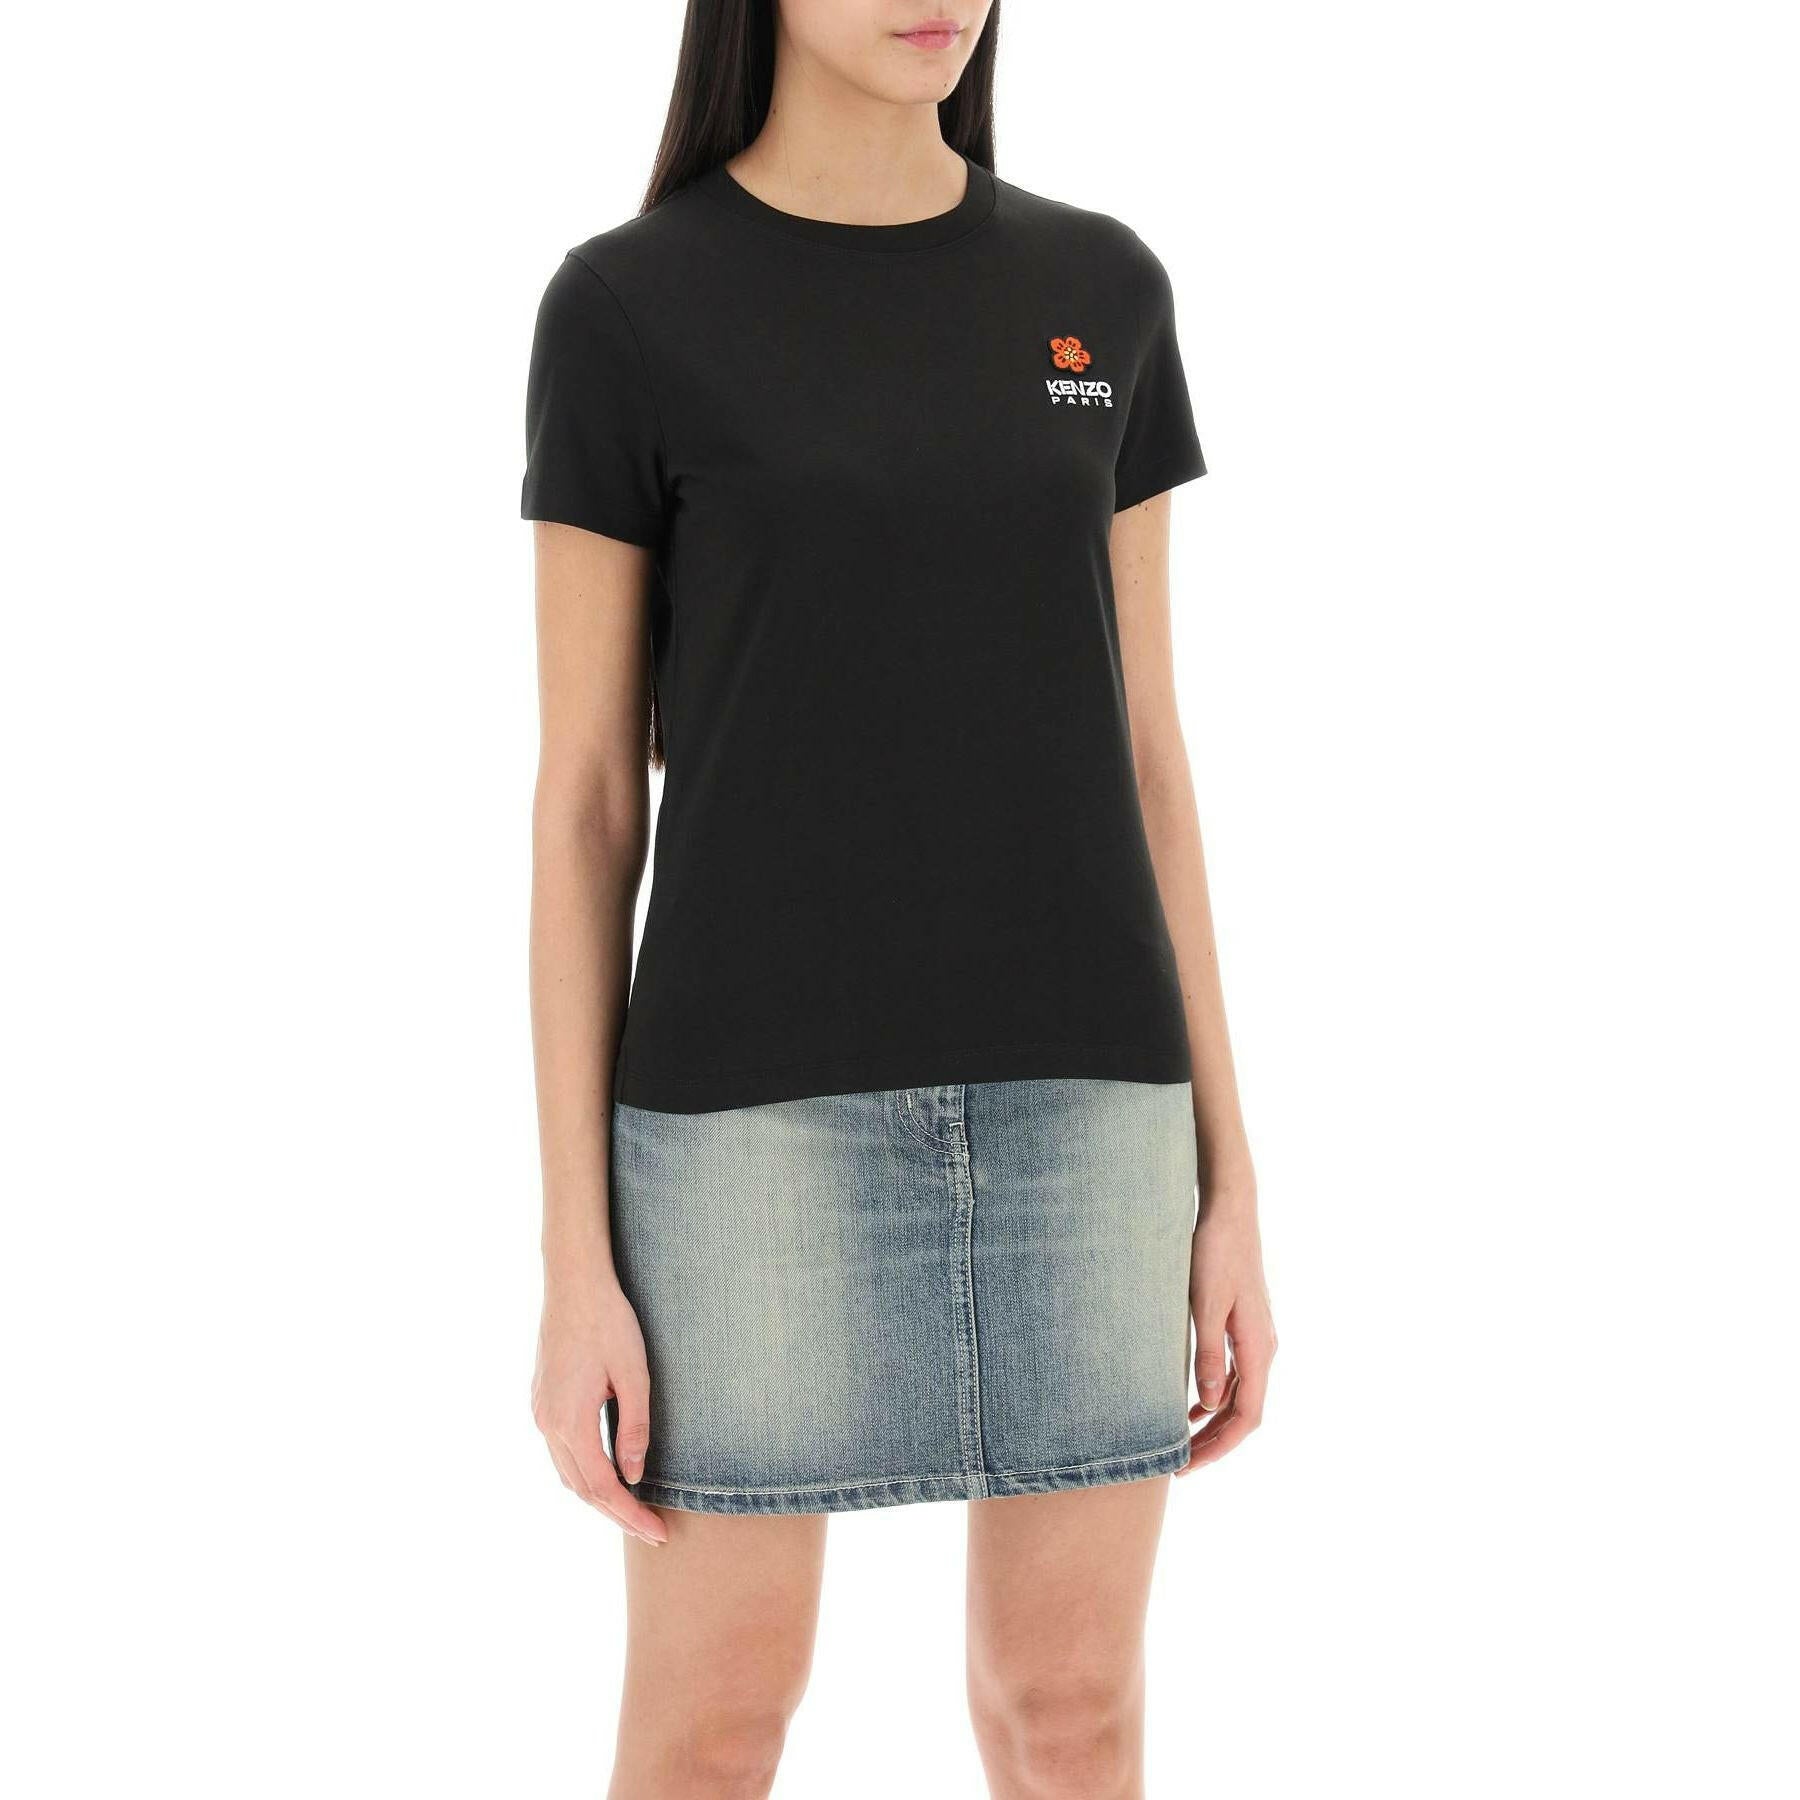 Boke Flower Embroidered Organic Cotton T-Shirt.